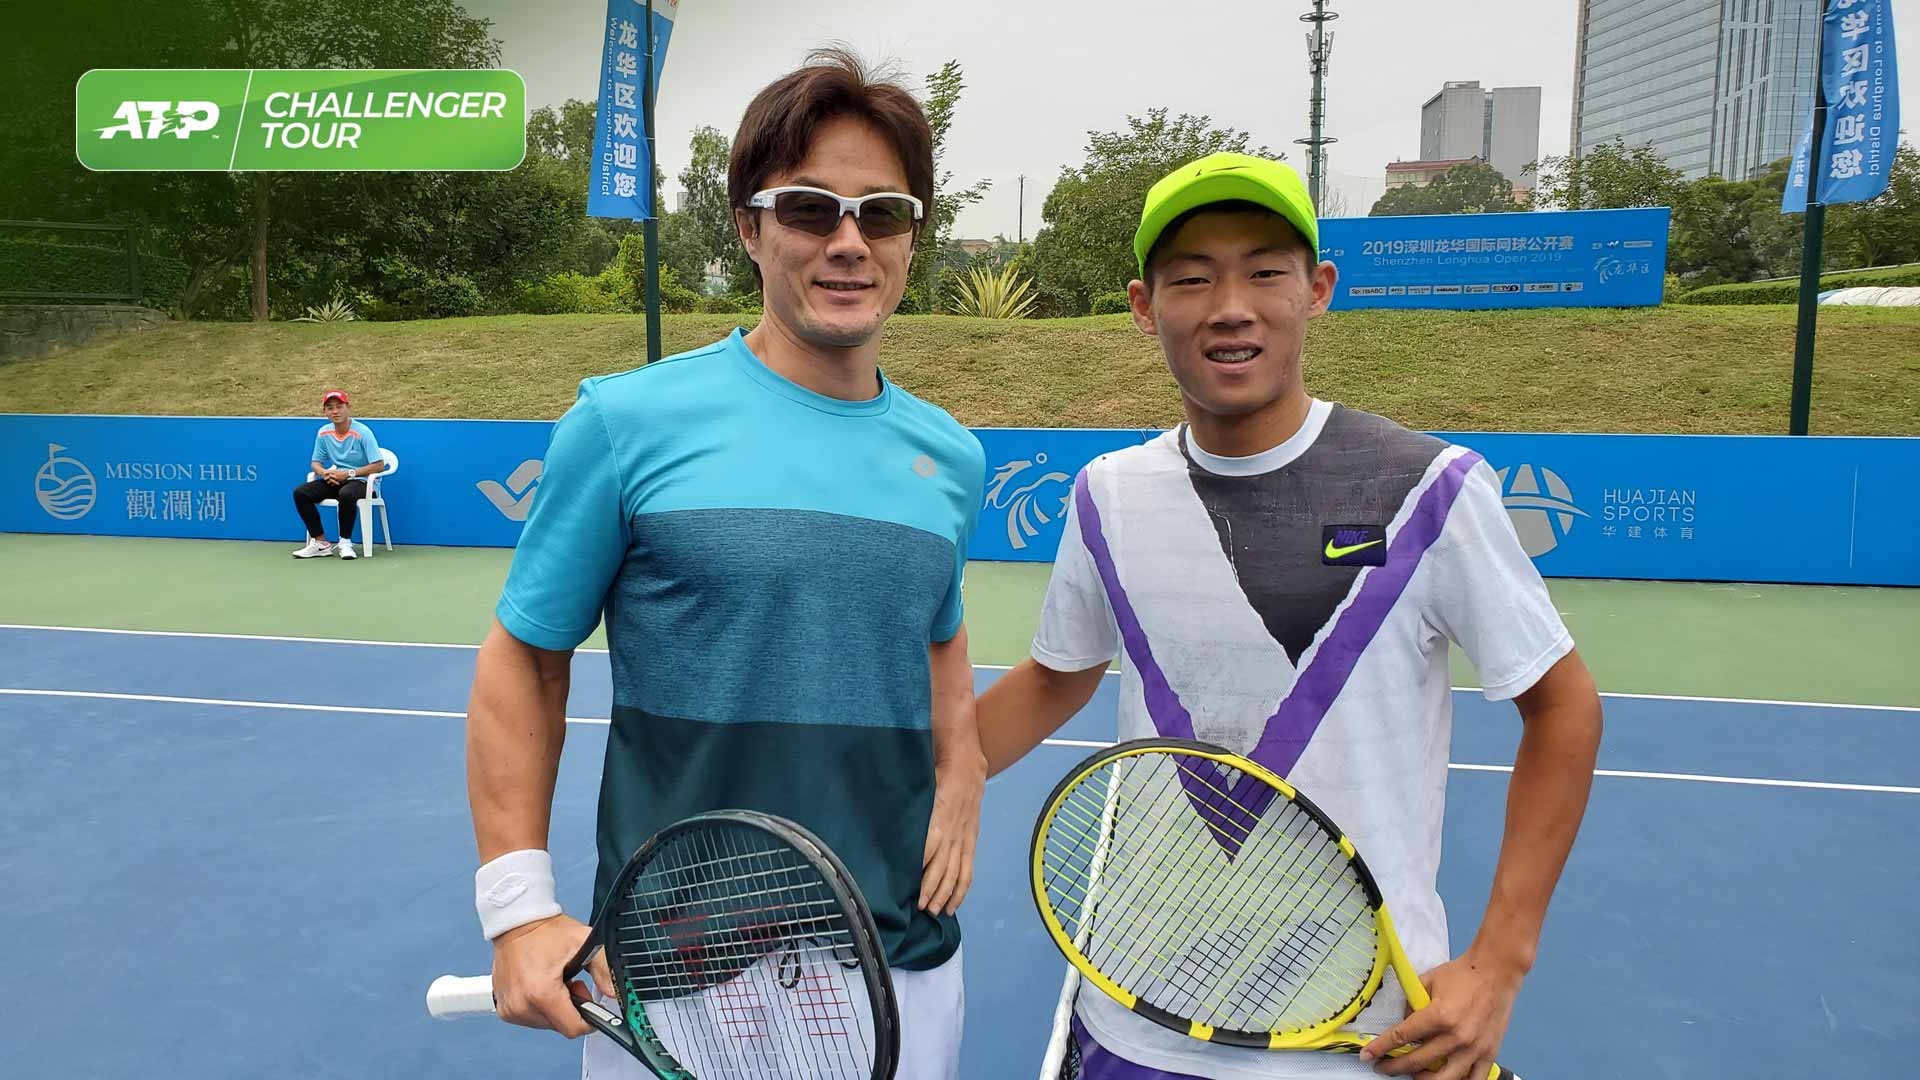 Battle Of Generations The 23-Year Age Gap In Shenzhen ATP Tour Tennis